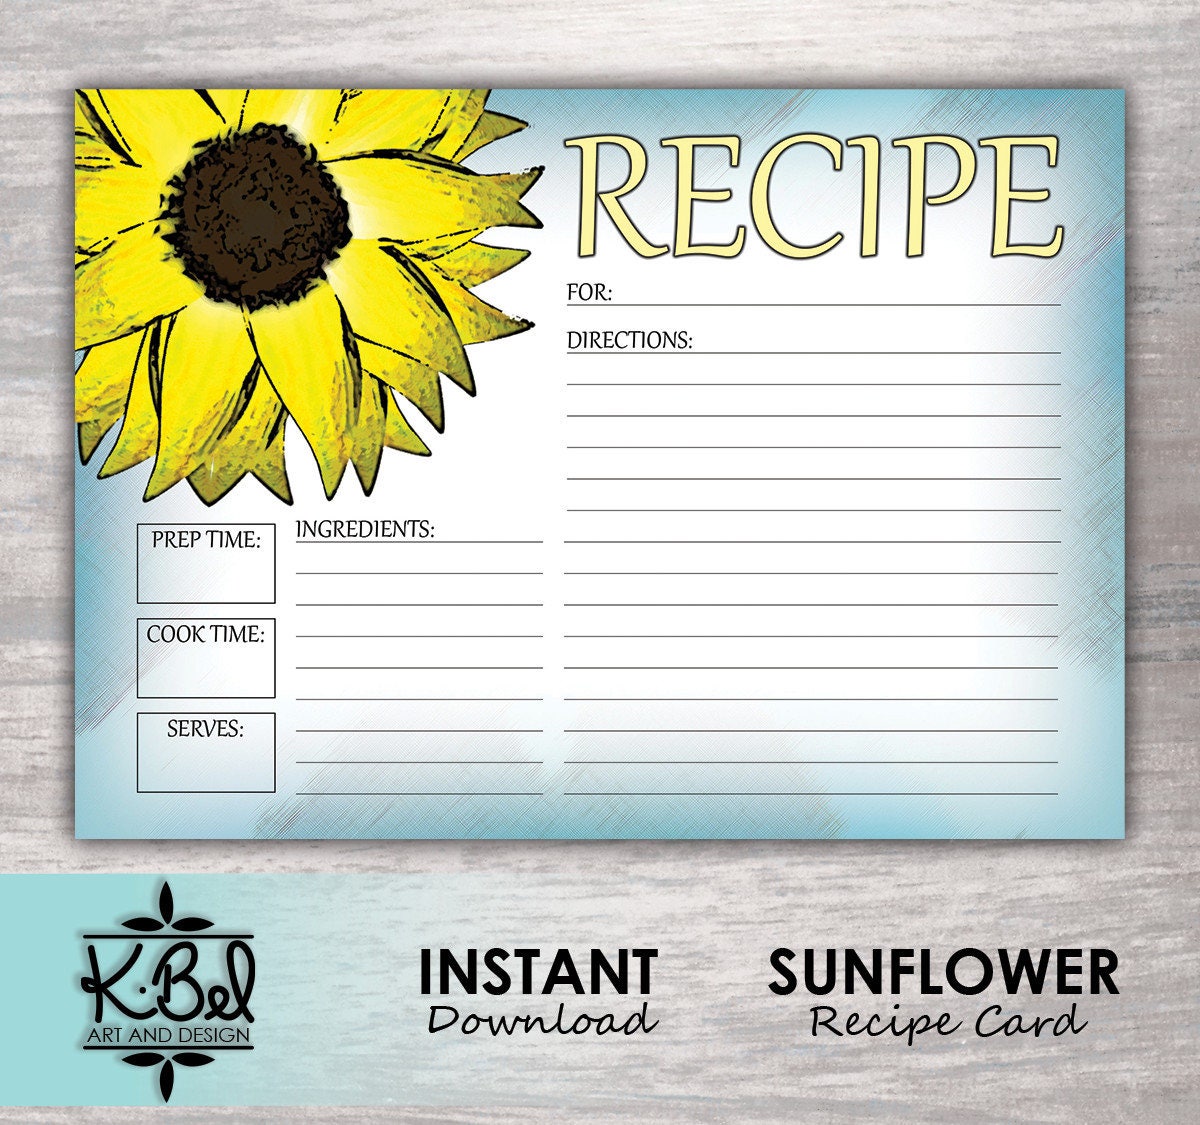 printable-sunflower-recipe-cards-blue-teal-background-etsy